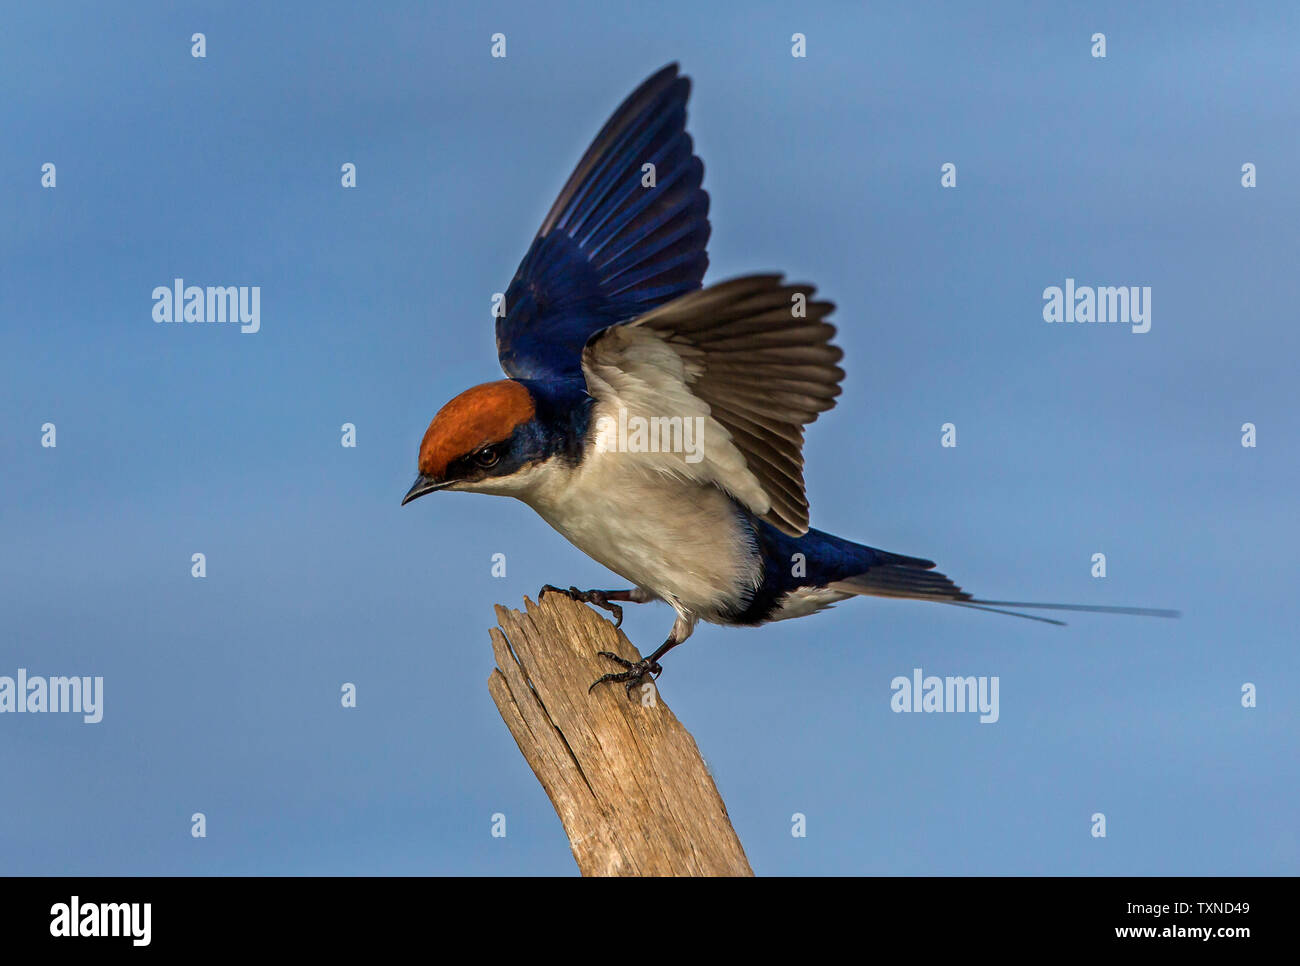 Filo-tailed swallow appollaiate su fencepost, vista laterale, Kruger National Park, Sud Africa Foto Stock